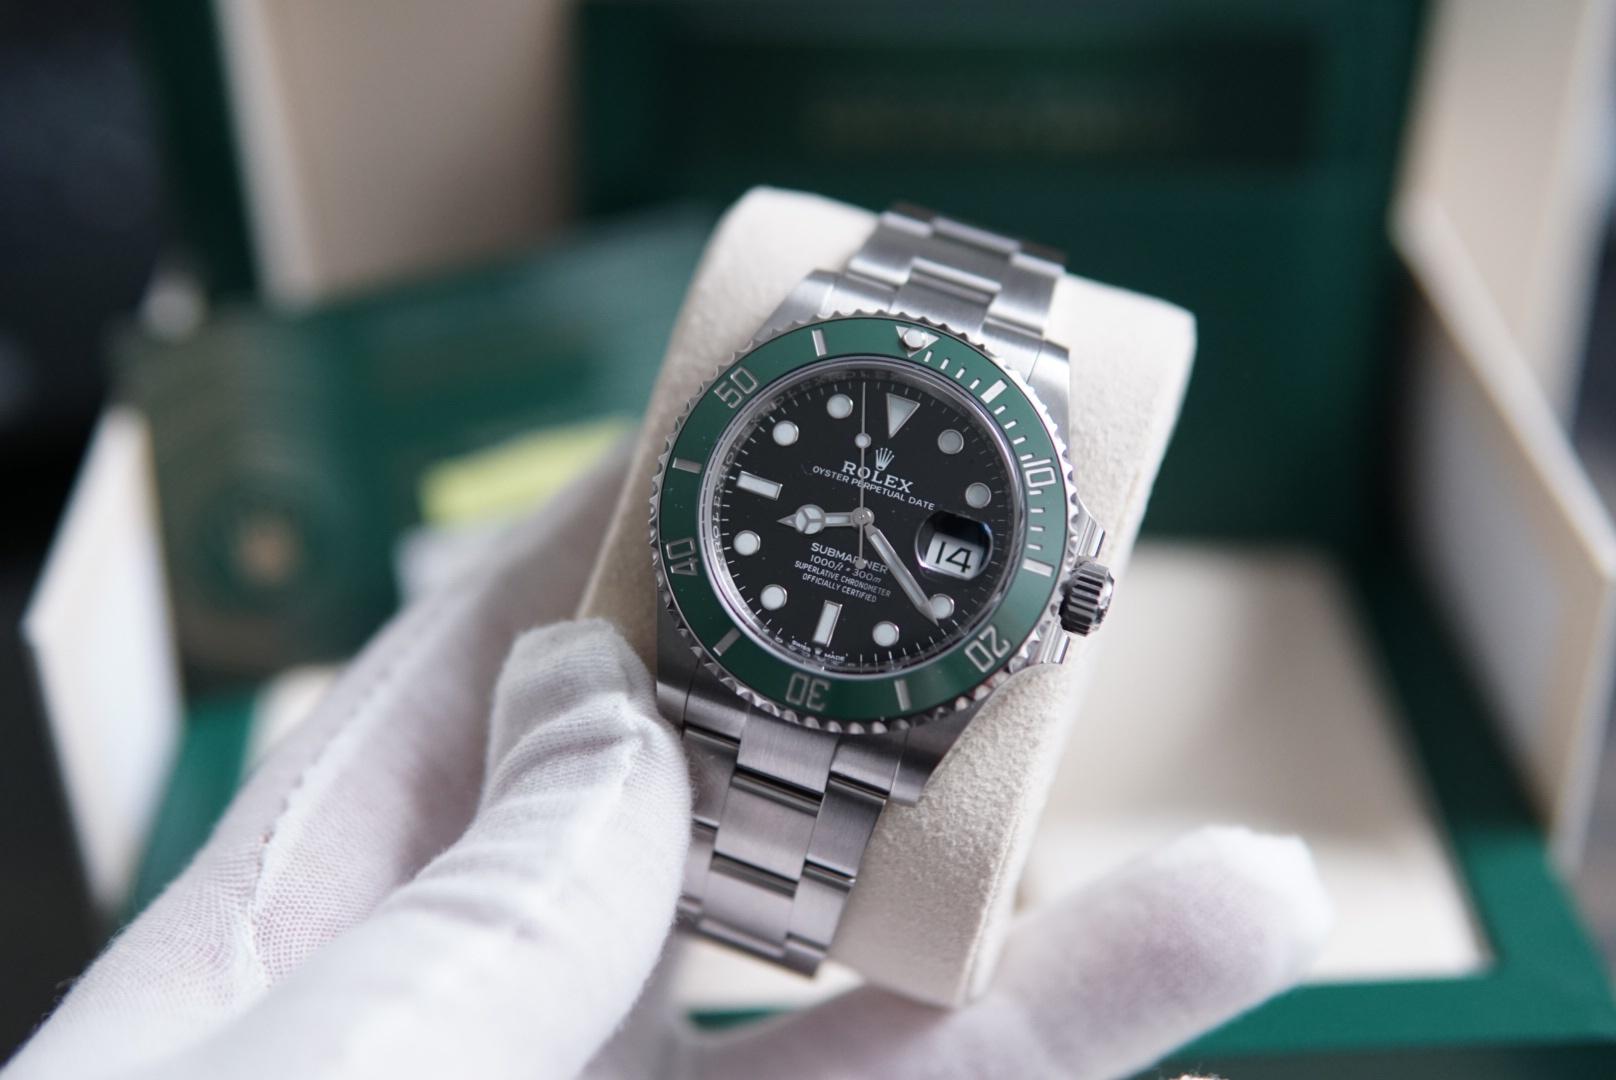 Rolex Submariner Date Kermit Cermit Starbucks 41mm 126610lv Green for  $16,977 for sale from a Trusted Seller on Chrono24